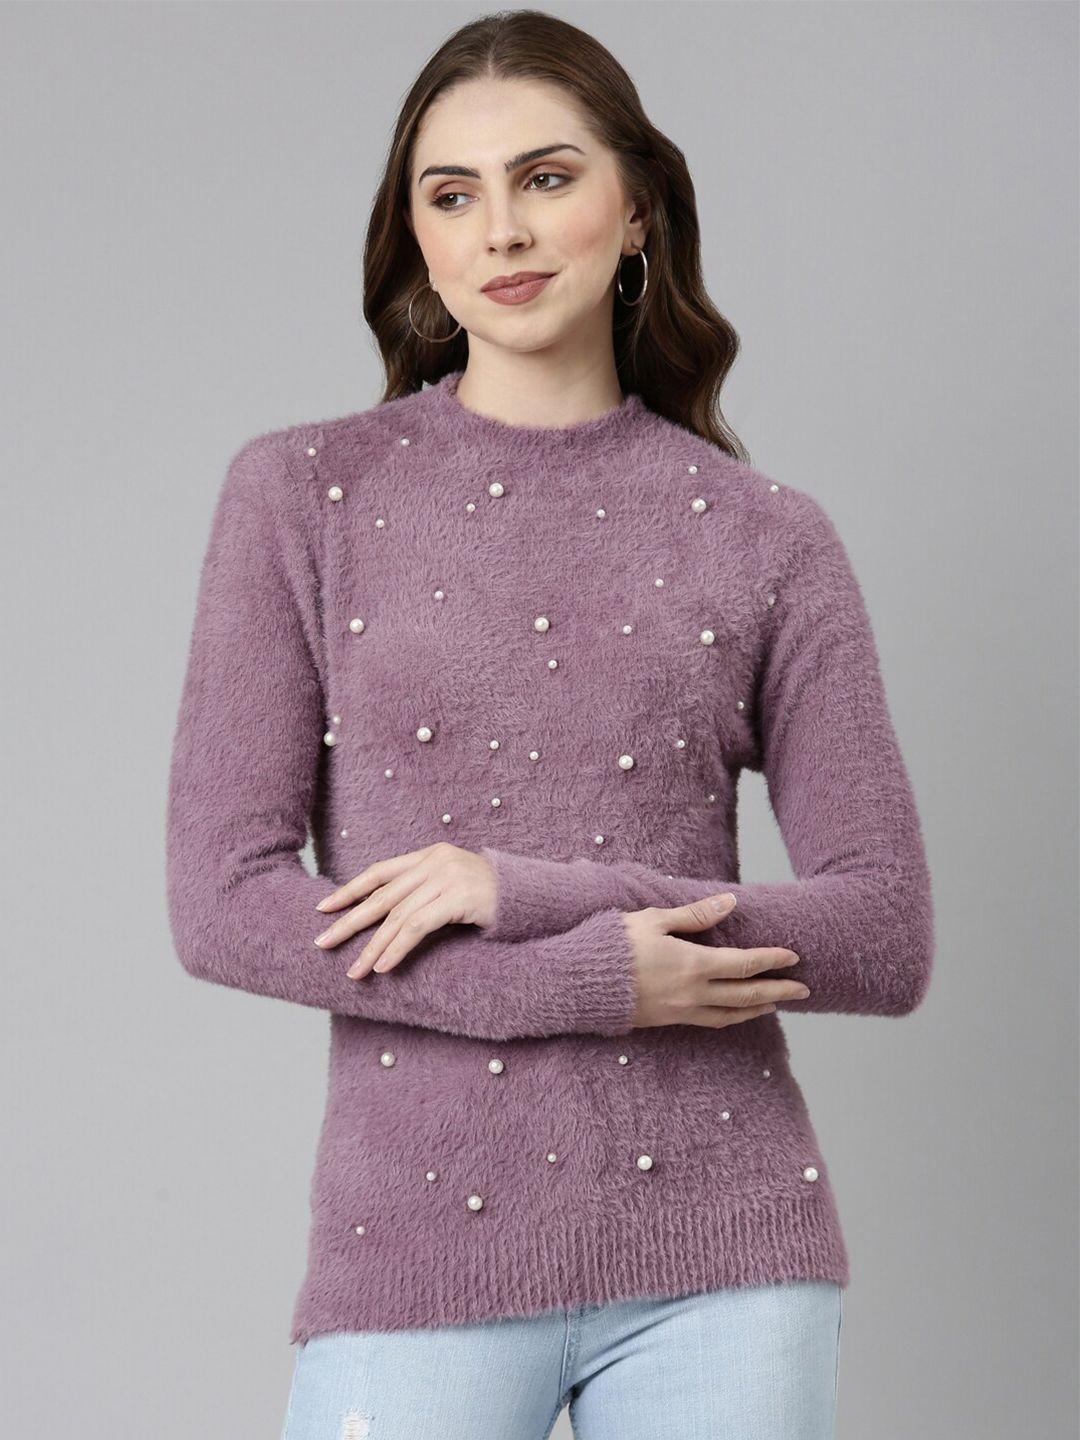 showoff-high-neck-pearl-studded-woollen-top